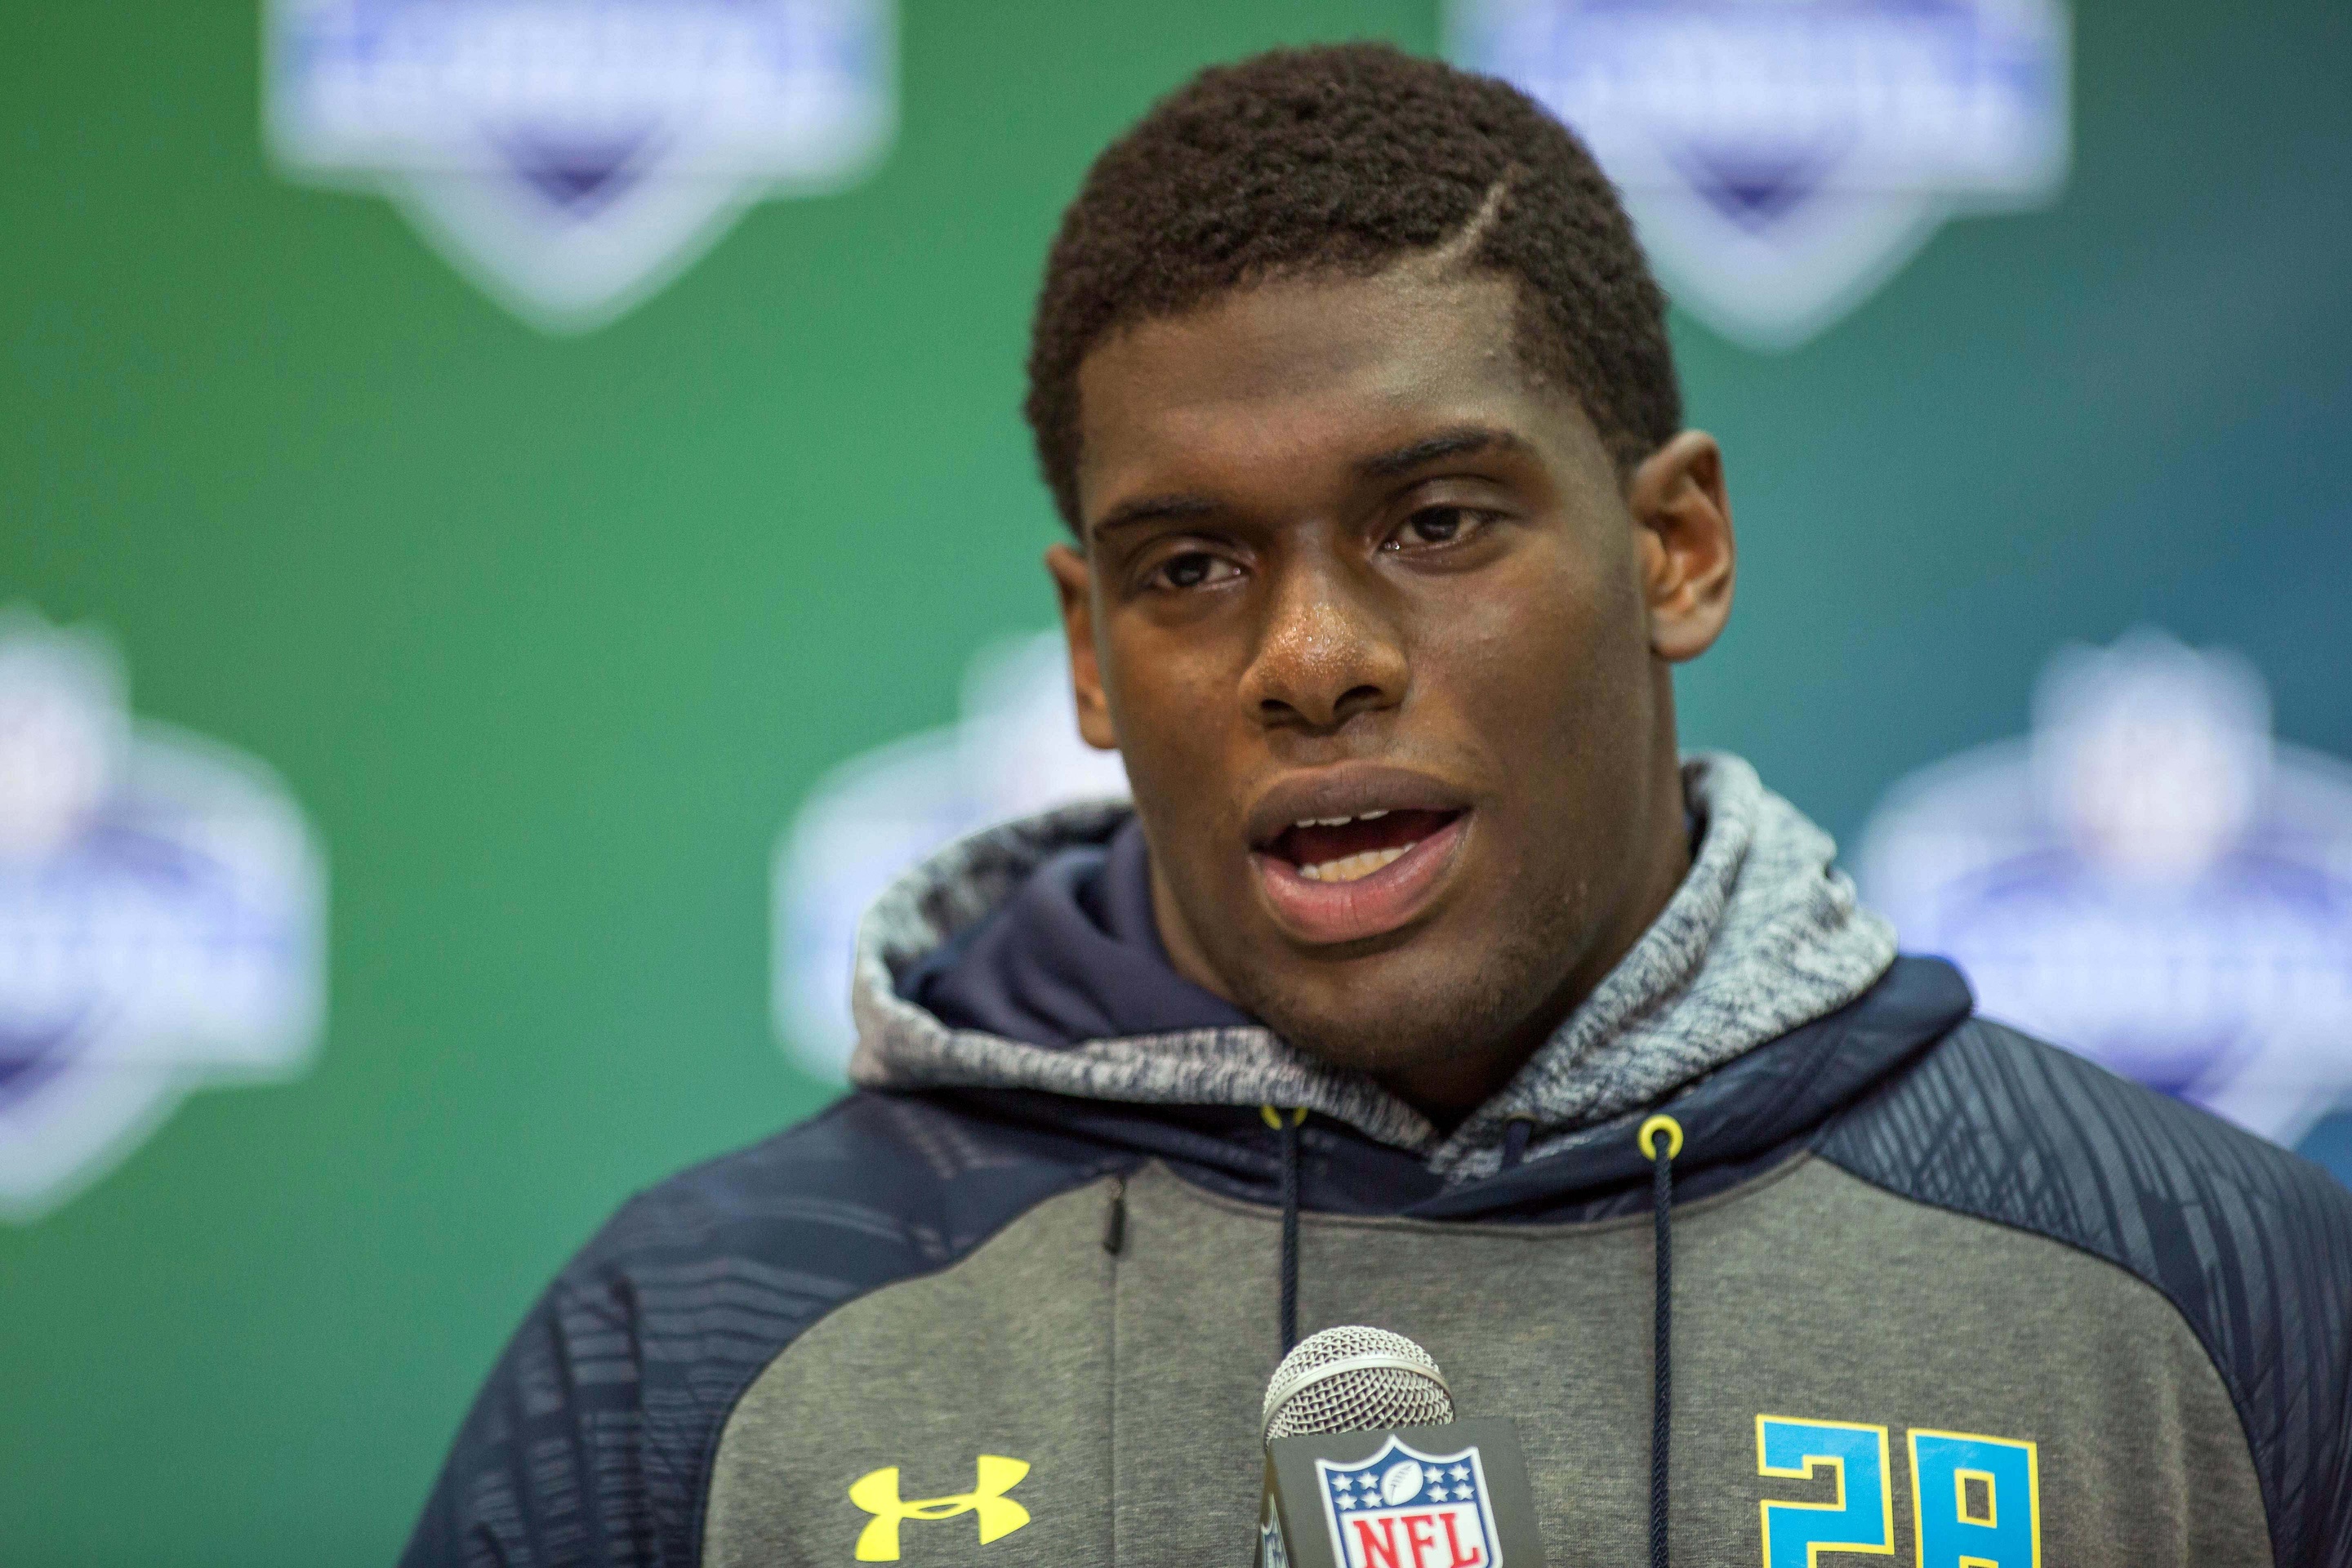 Mar 4, 2017; Indianapolis, IN, USA; Auburn defensive end Carl Lawson speaks to the media during the 2017 combine at Indiana Convention Center. Mandatory Credit: Trevor Ruszkowski-USA TODAY Sports